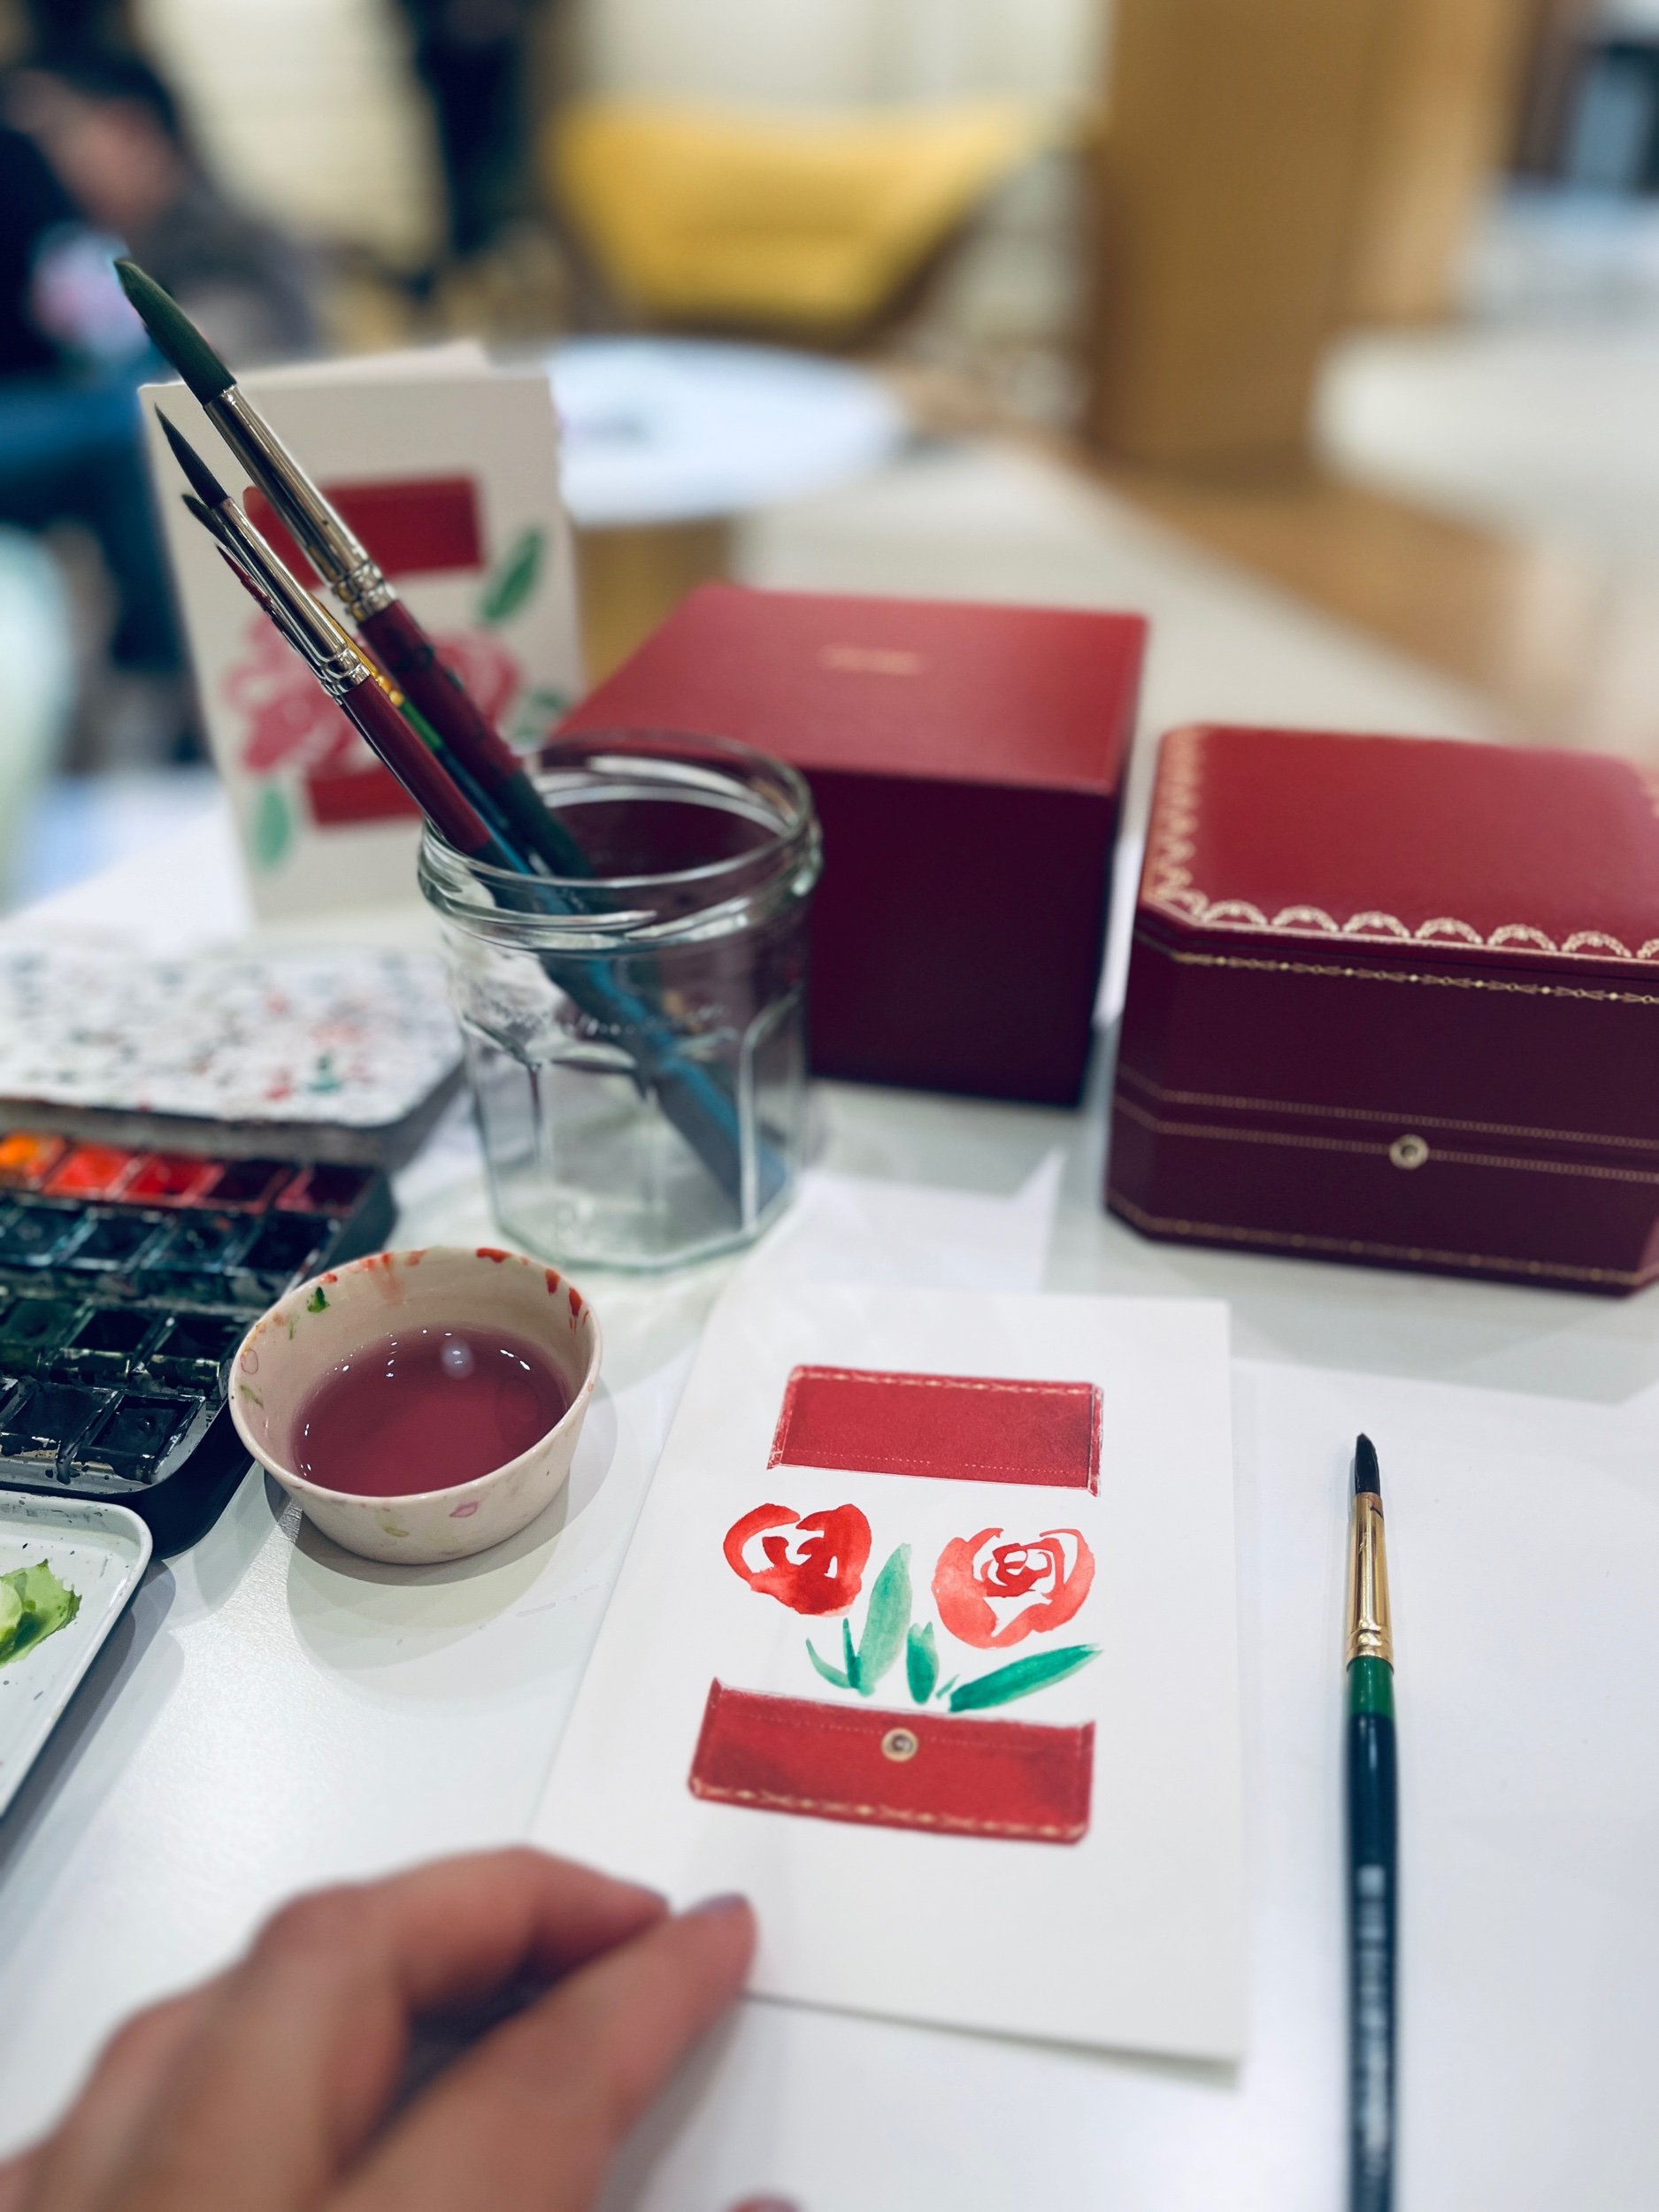 Live art activation for Cartier through The Calligraphy Co.